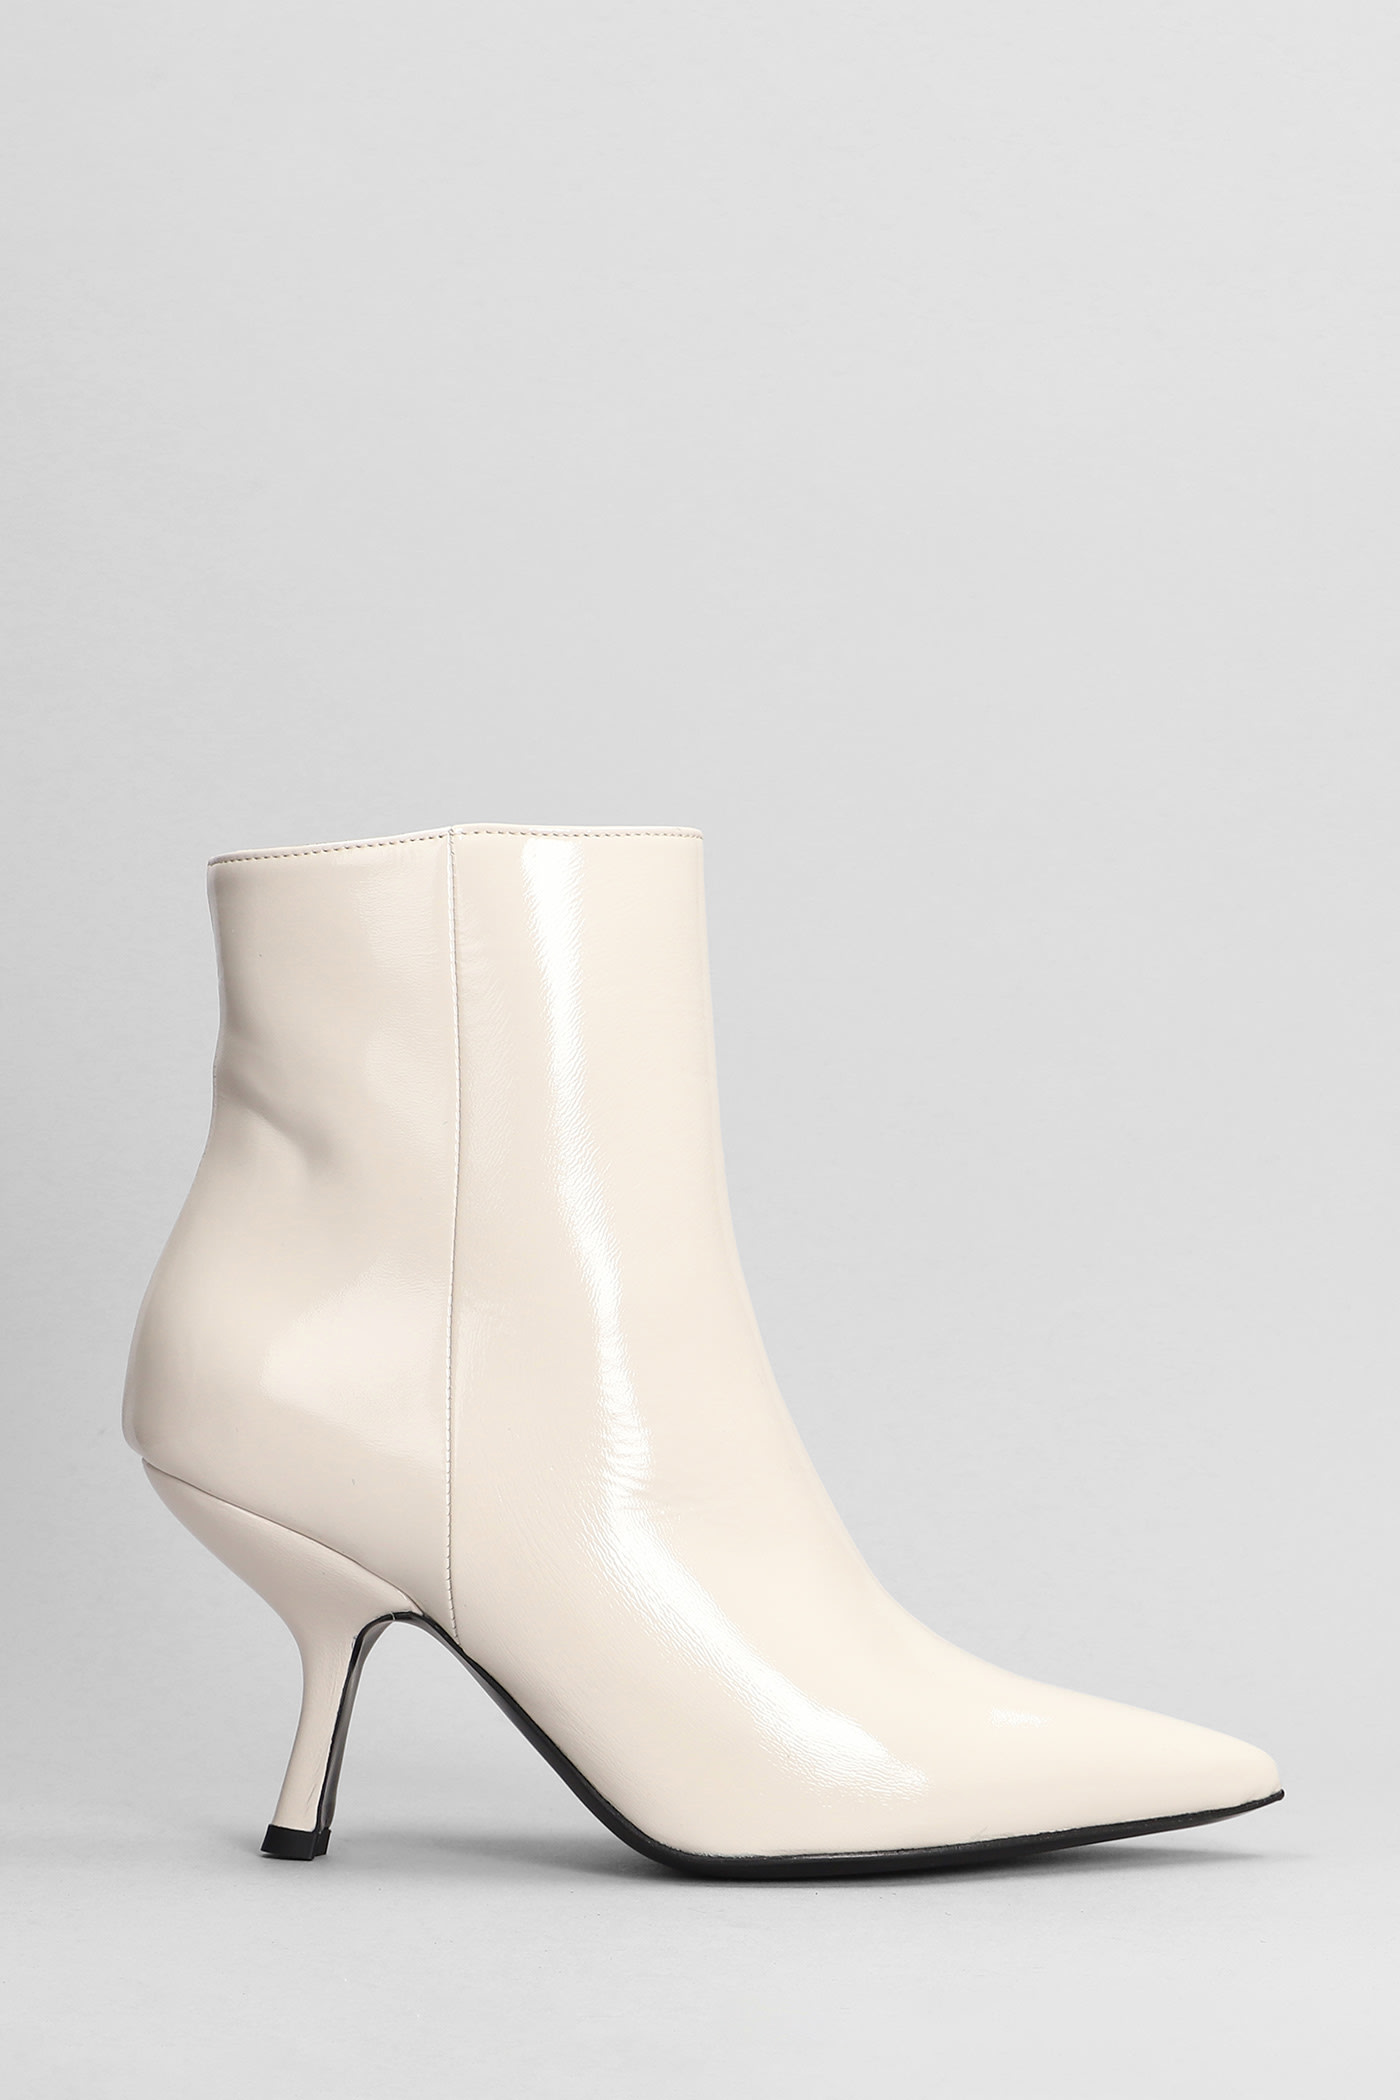 High Heels Ankle Boots In Beige Patent Leather